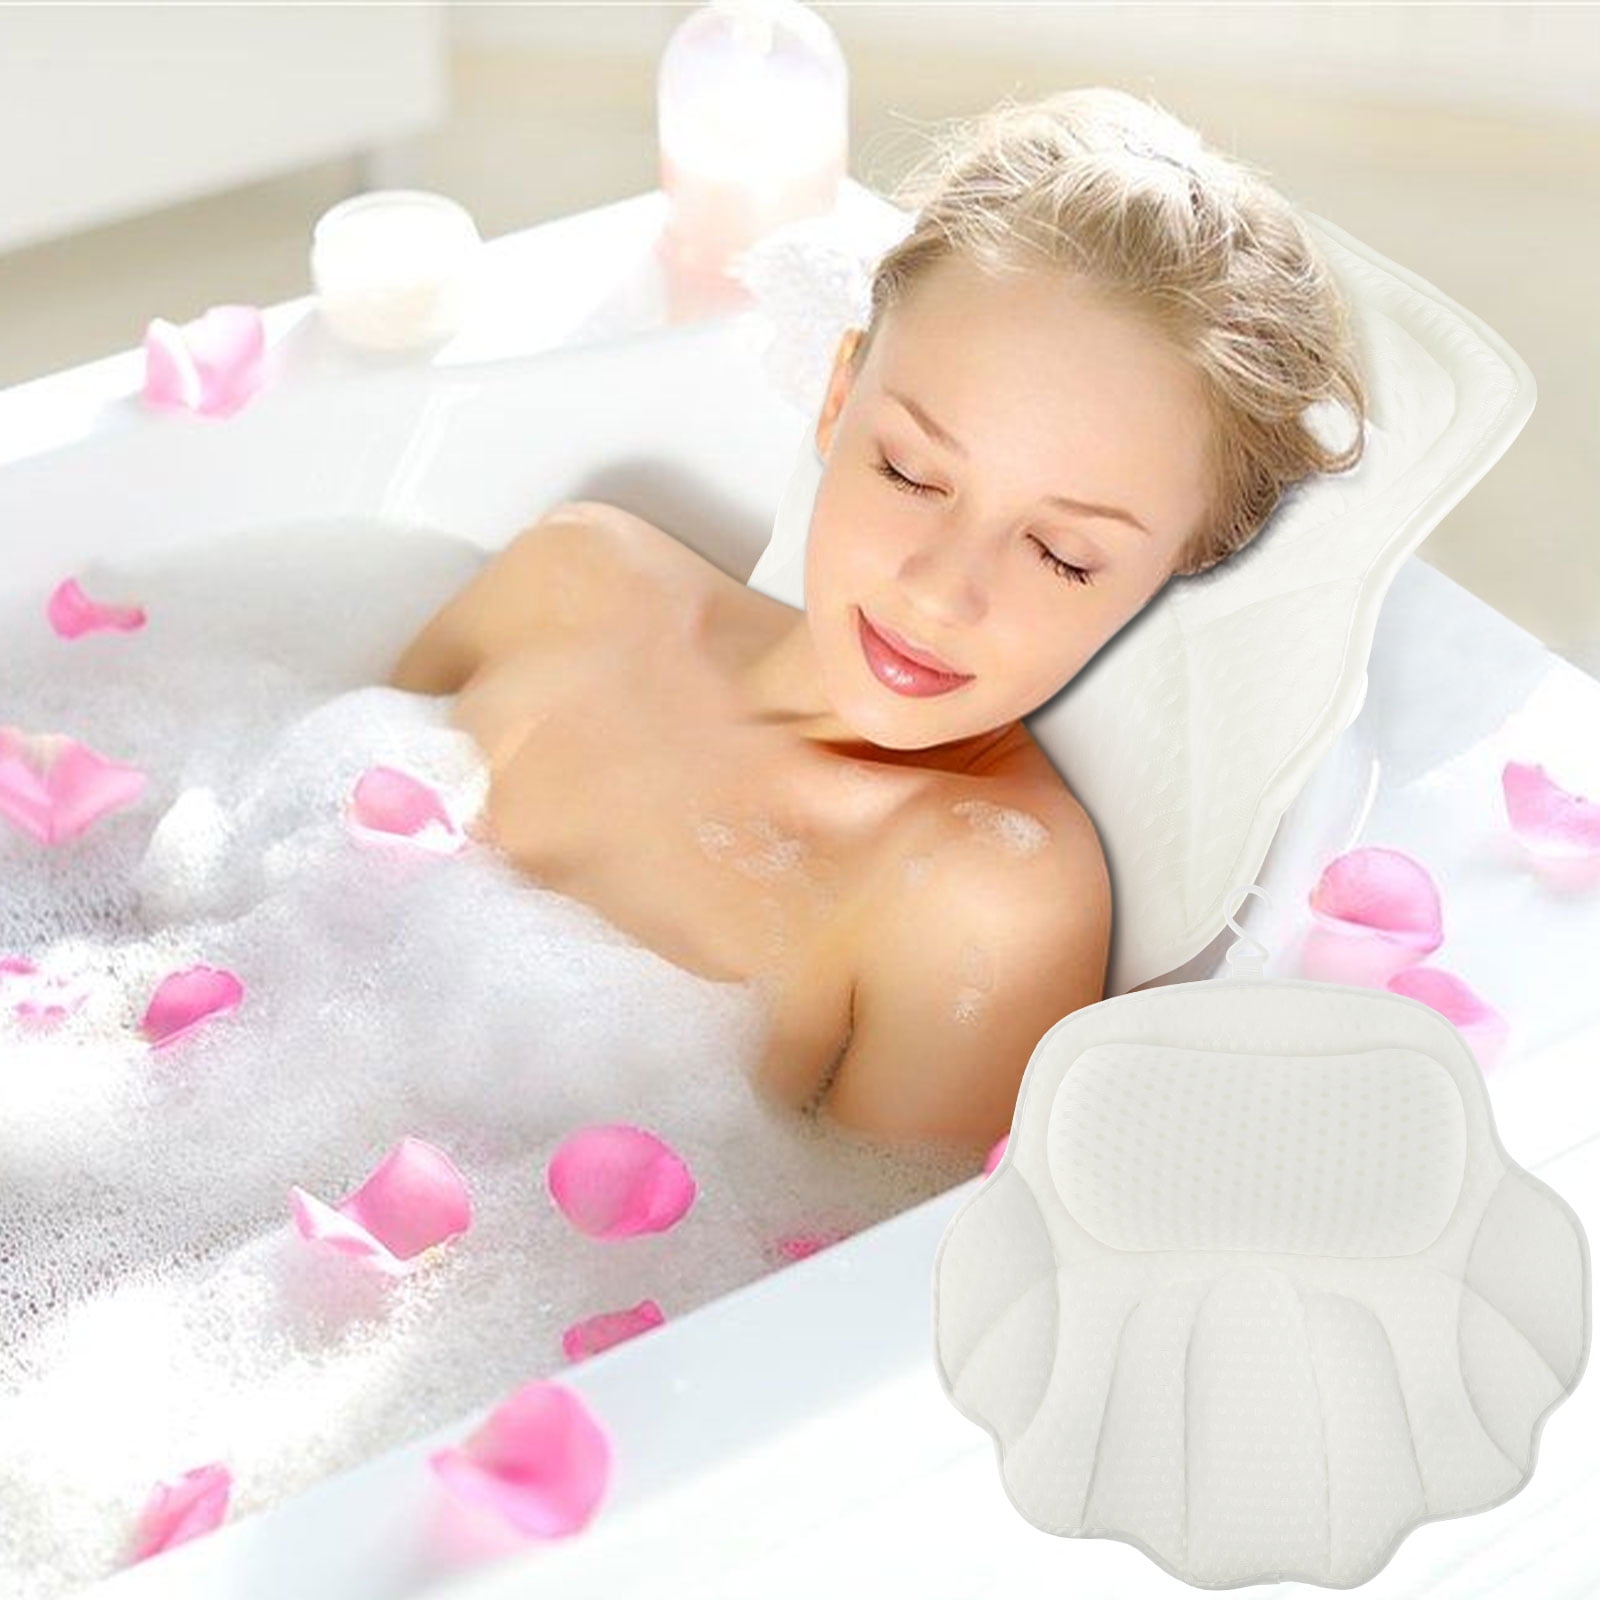 AmazeFan Luxury Bath Pillow, Ergonomic Bathtub Spa Pillow with 4D Air Mesh  Technology and 6 Suction Cups, Helps Support Head, Back, Shoulder and Neck,  Fits All Bathtub, Hot Tub and Home Spa(US